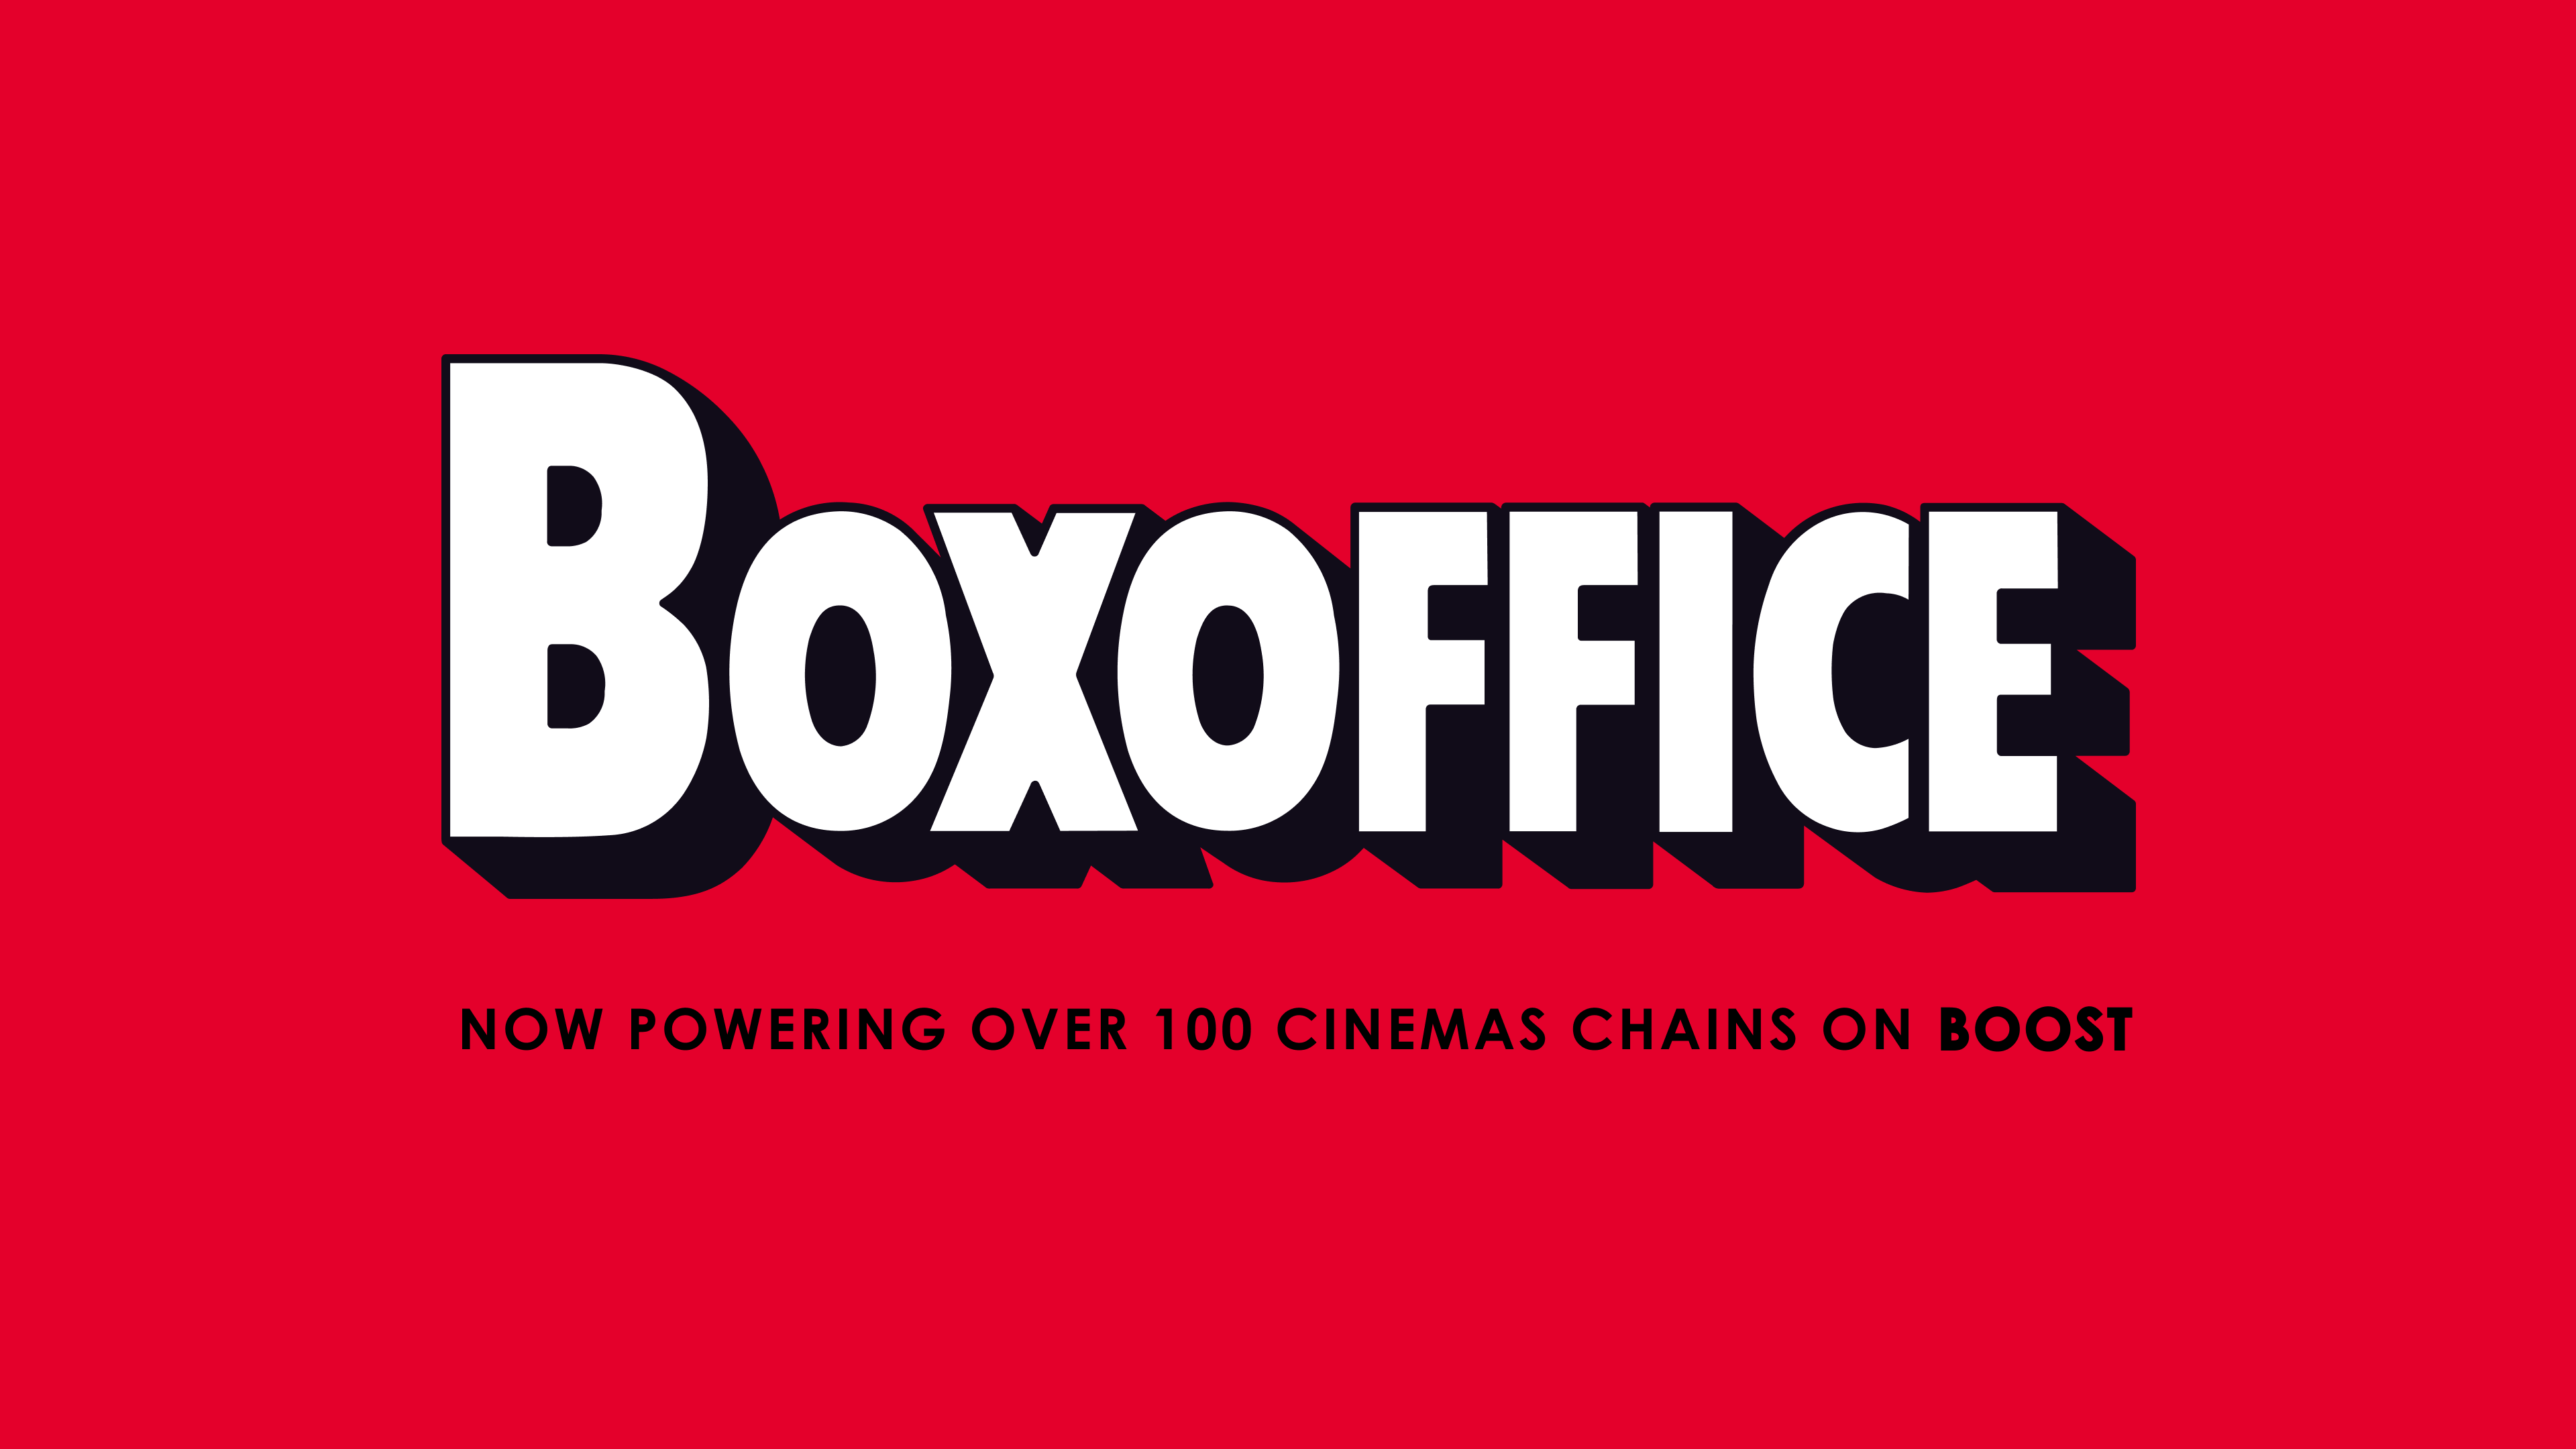 The Boxoffice Company Achieves Boost Platform Milestone with More Than 100  New Exhibitor Clients - Boxoffice